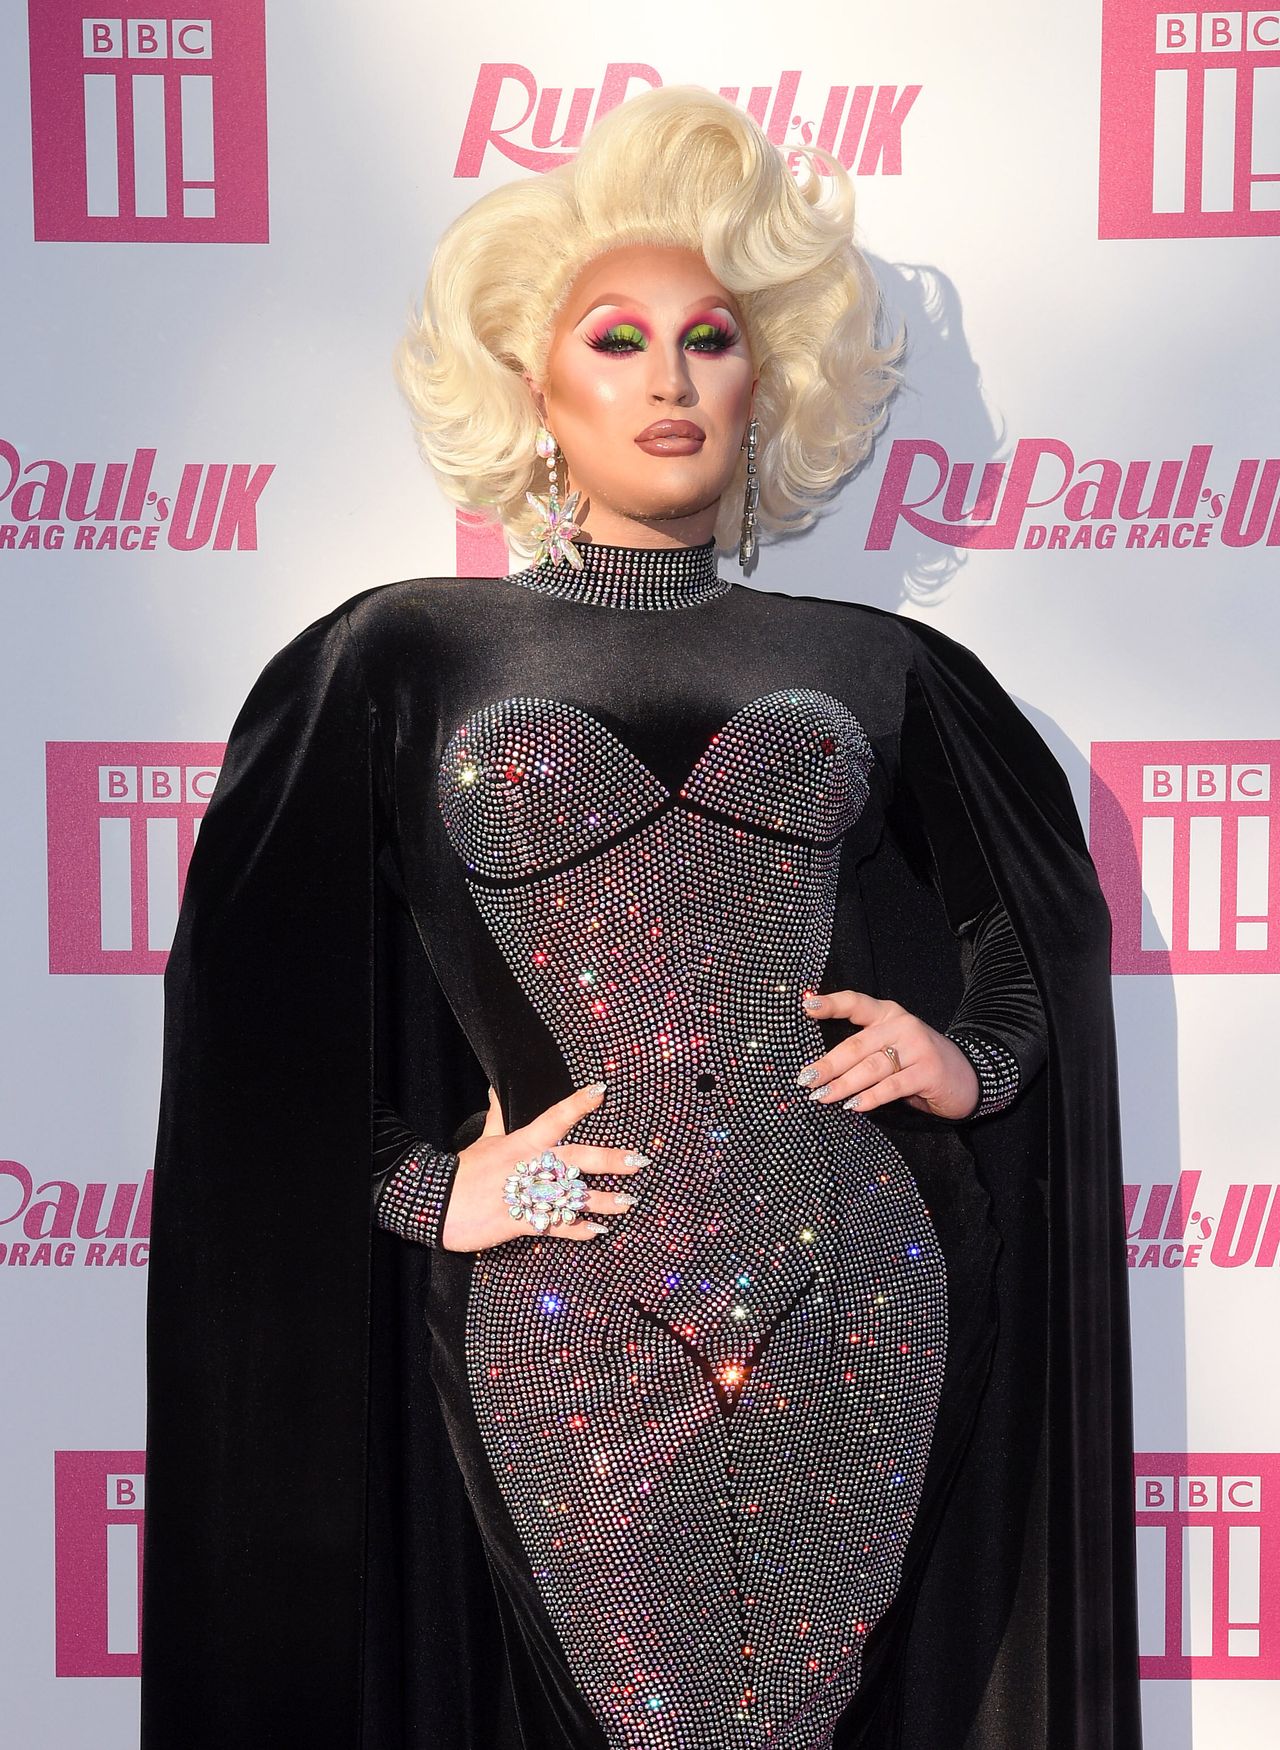 Drag Race UK winner The Vivienne is among the guests on Served! With Jade Thirlwall